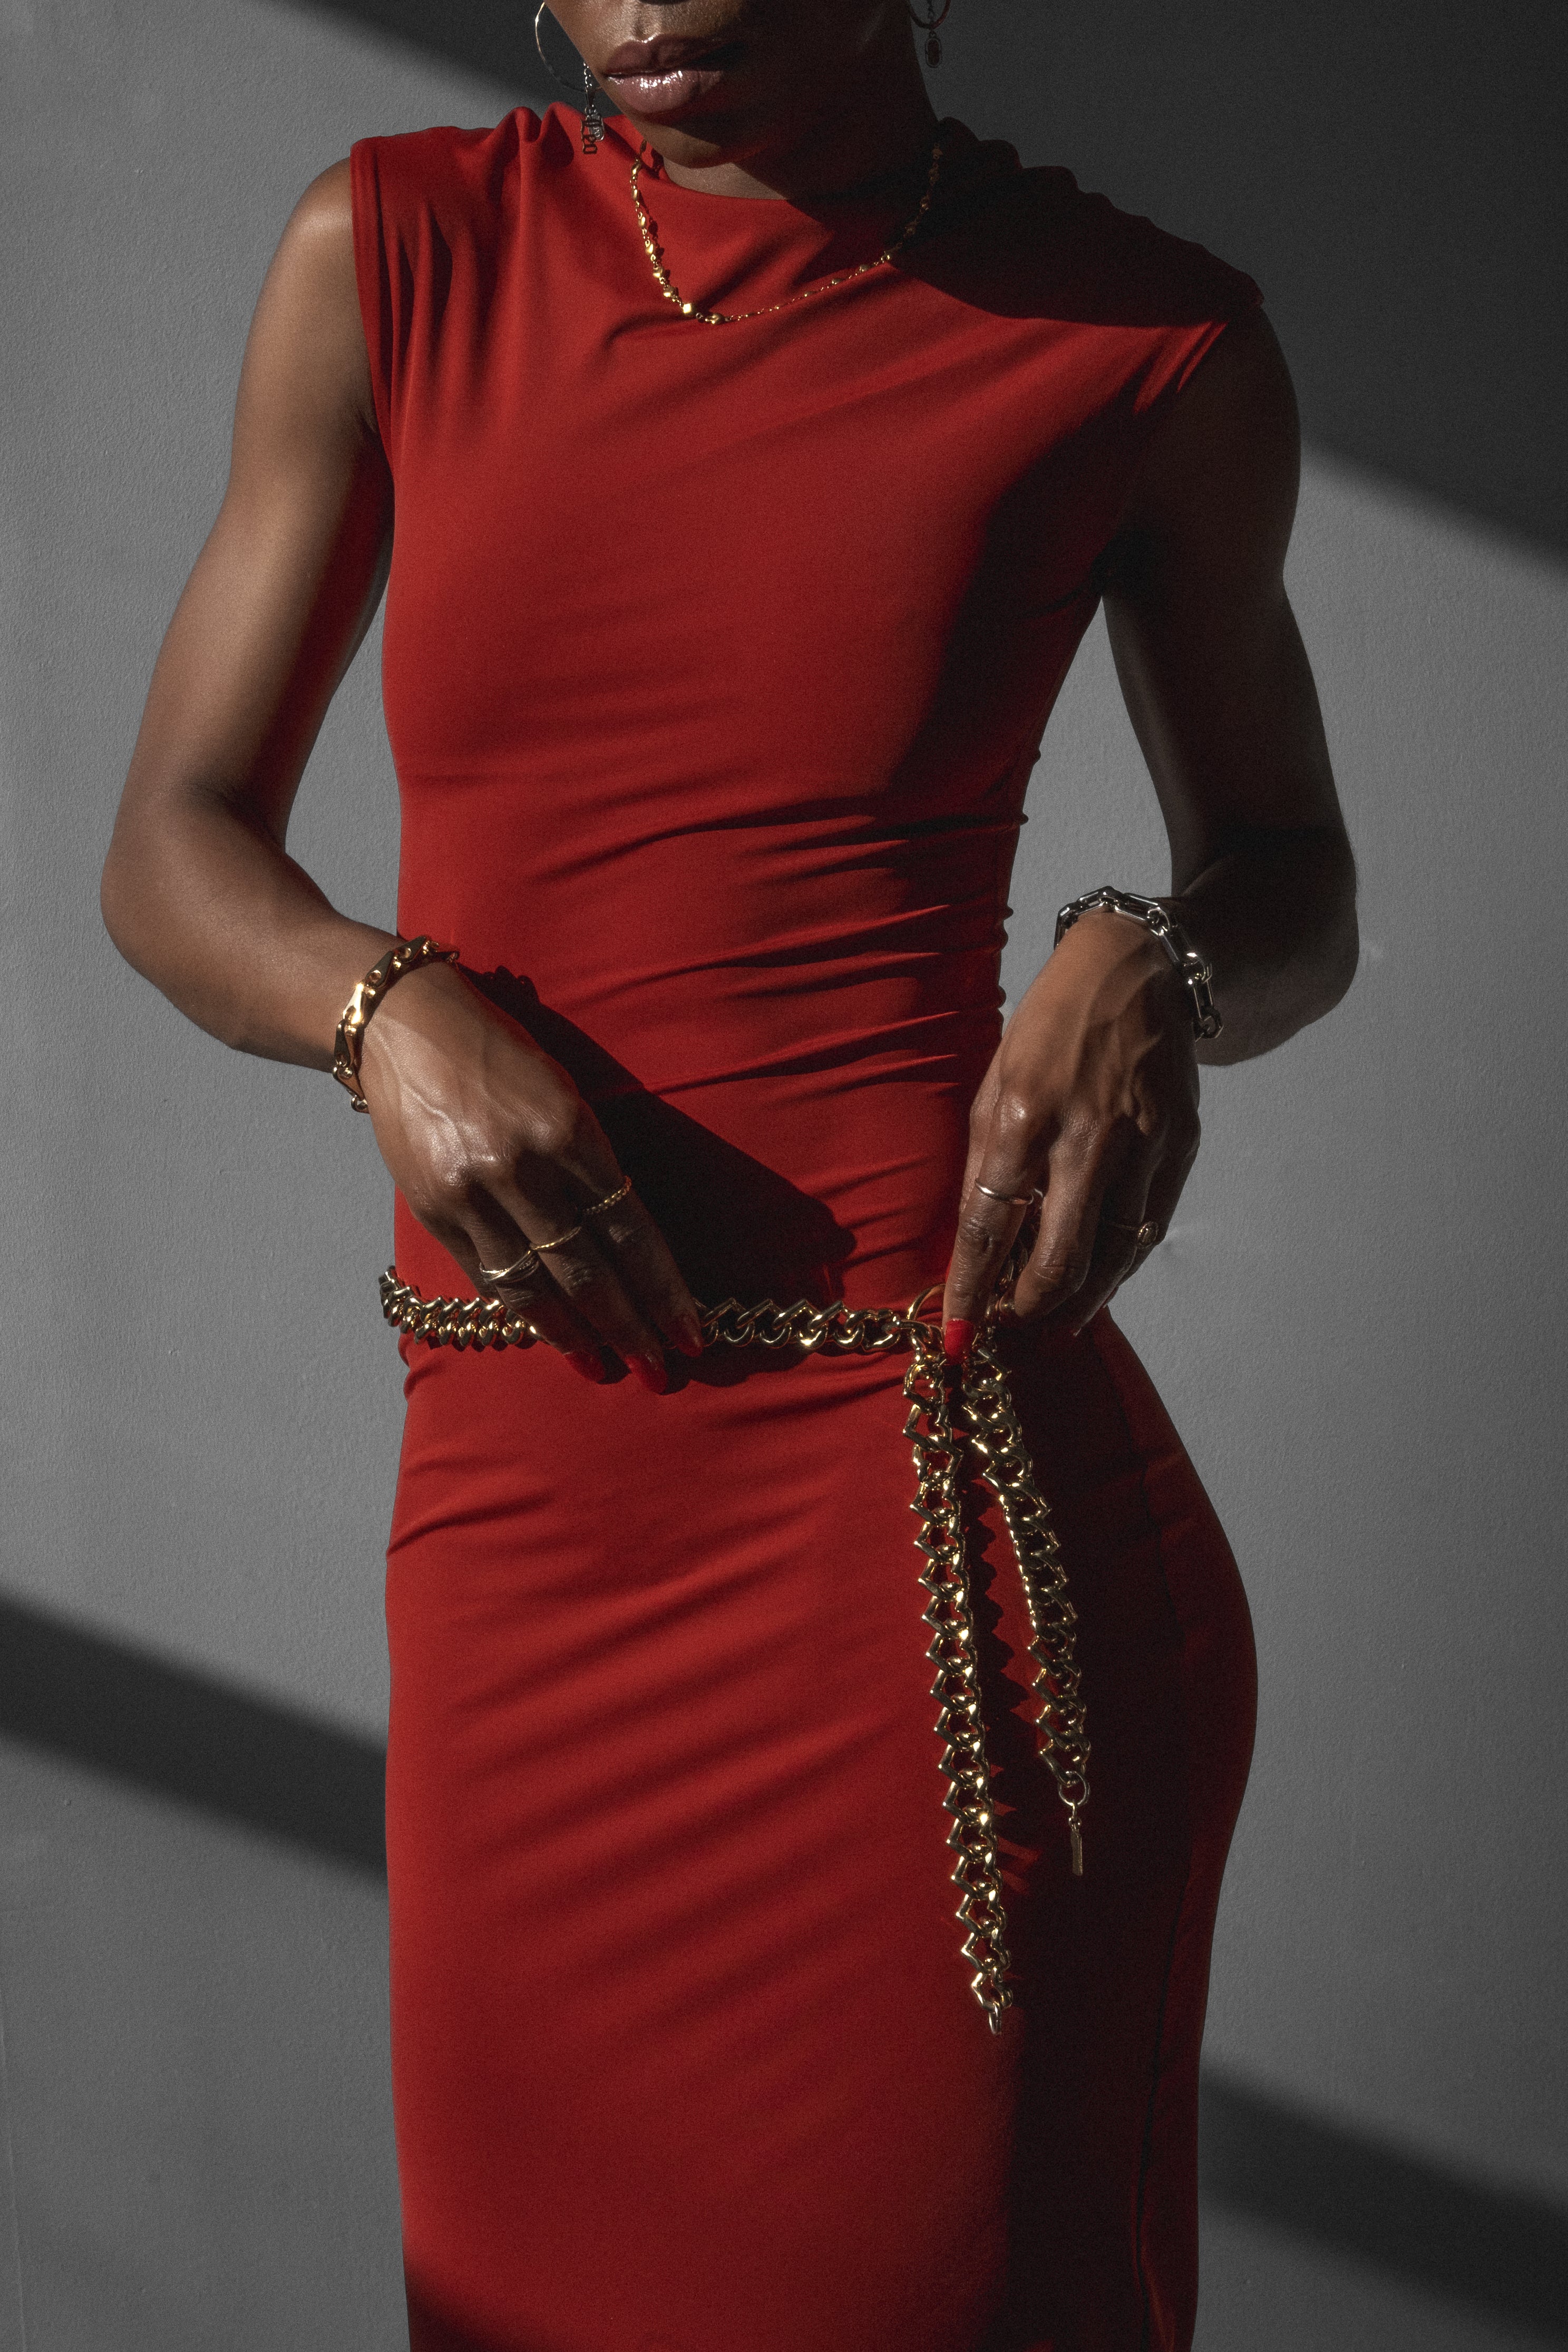 Woman wearing red bodycon midi dress while putting on gold chain belt